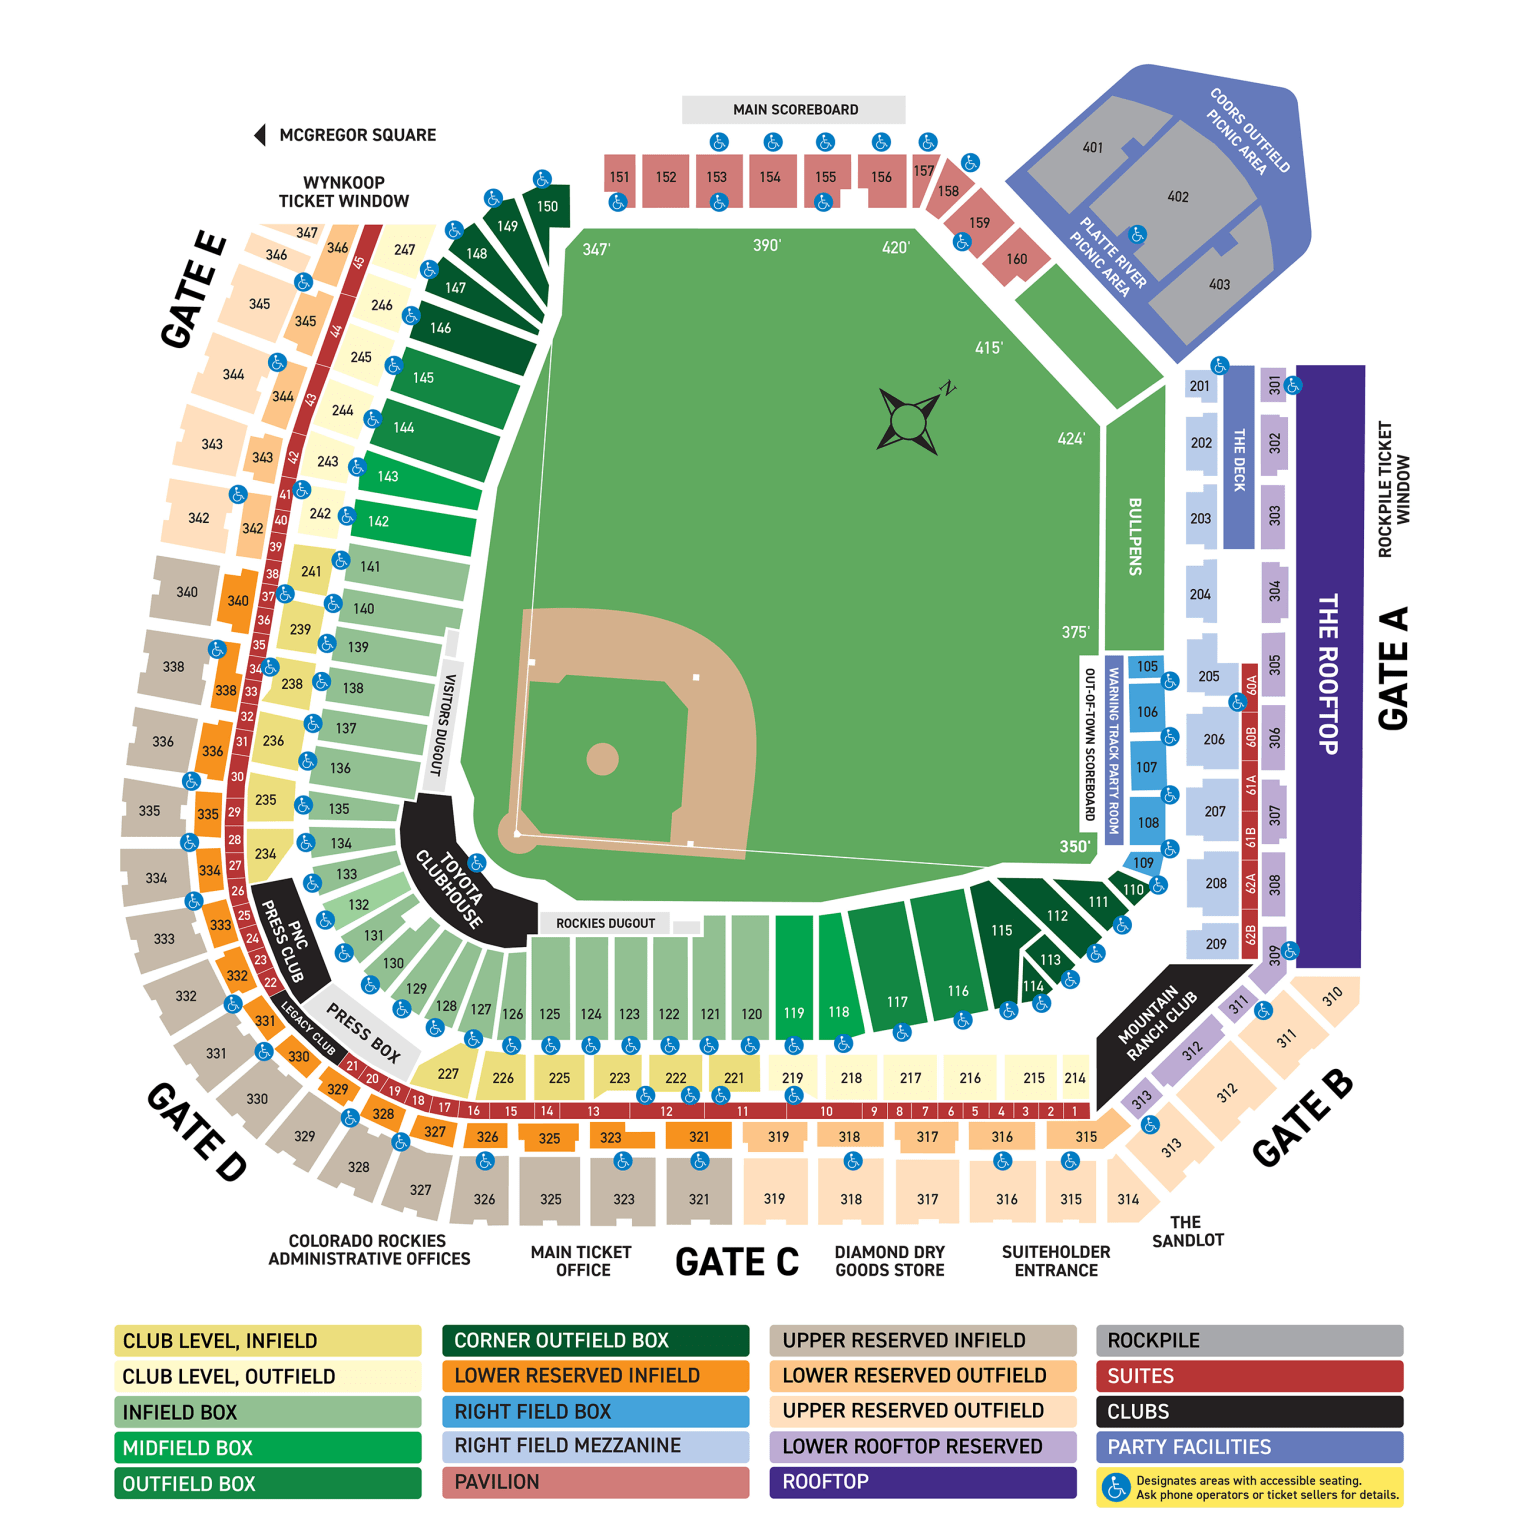 Section 403 at Coors Field 